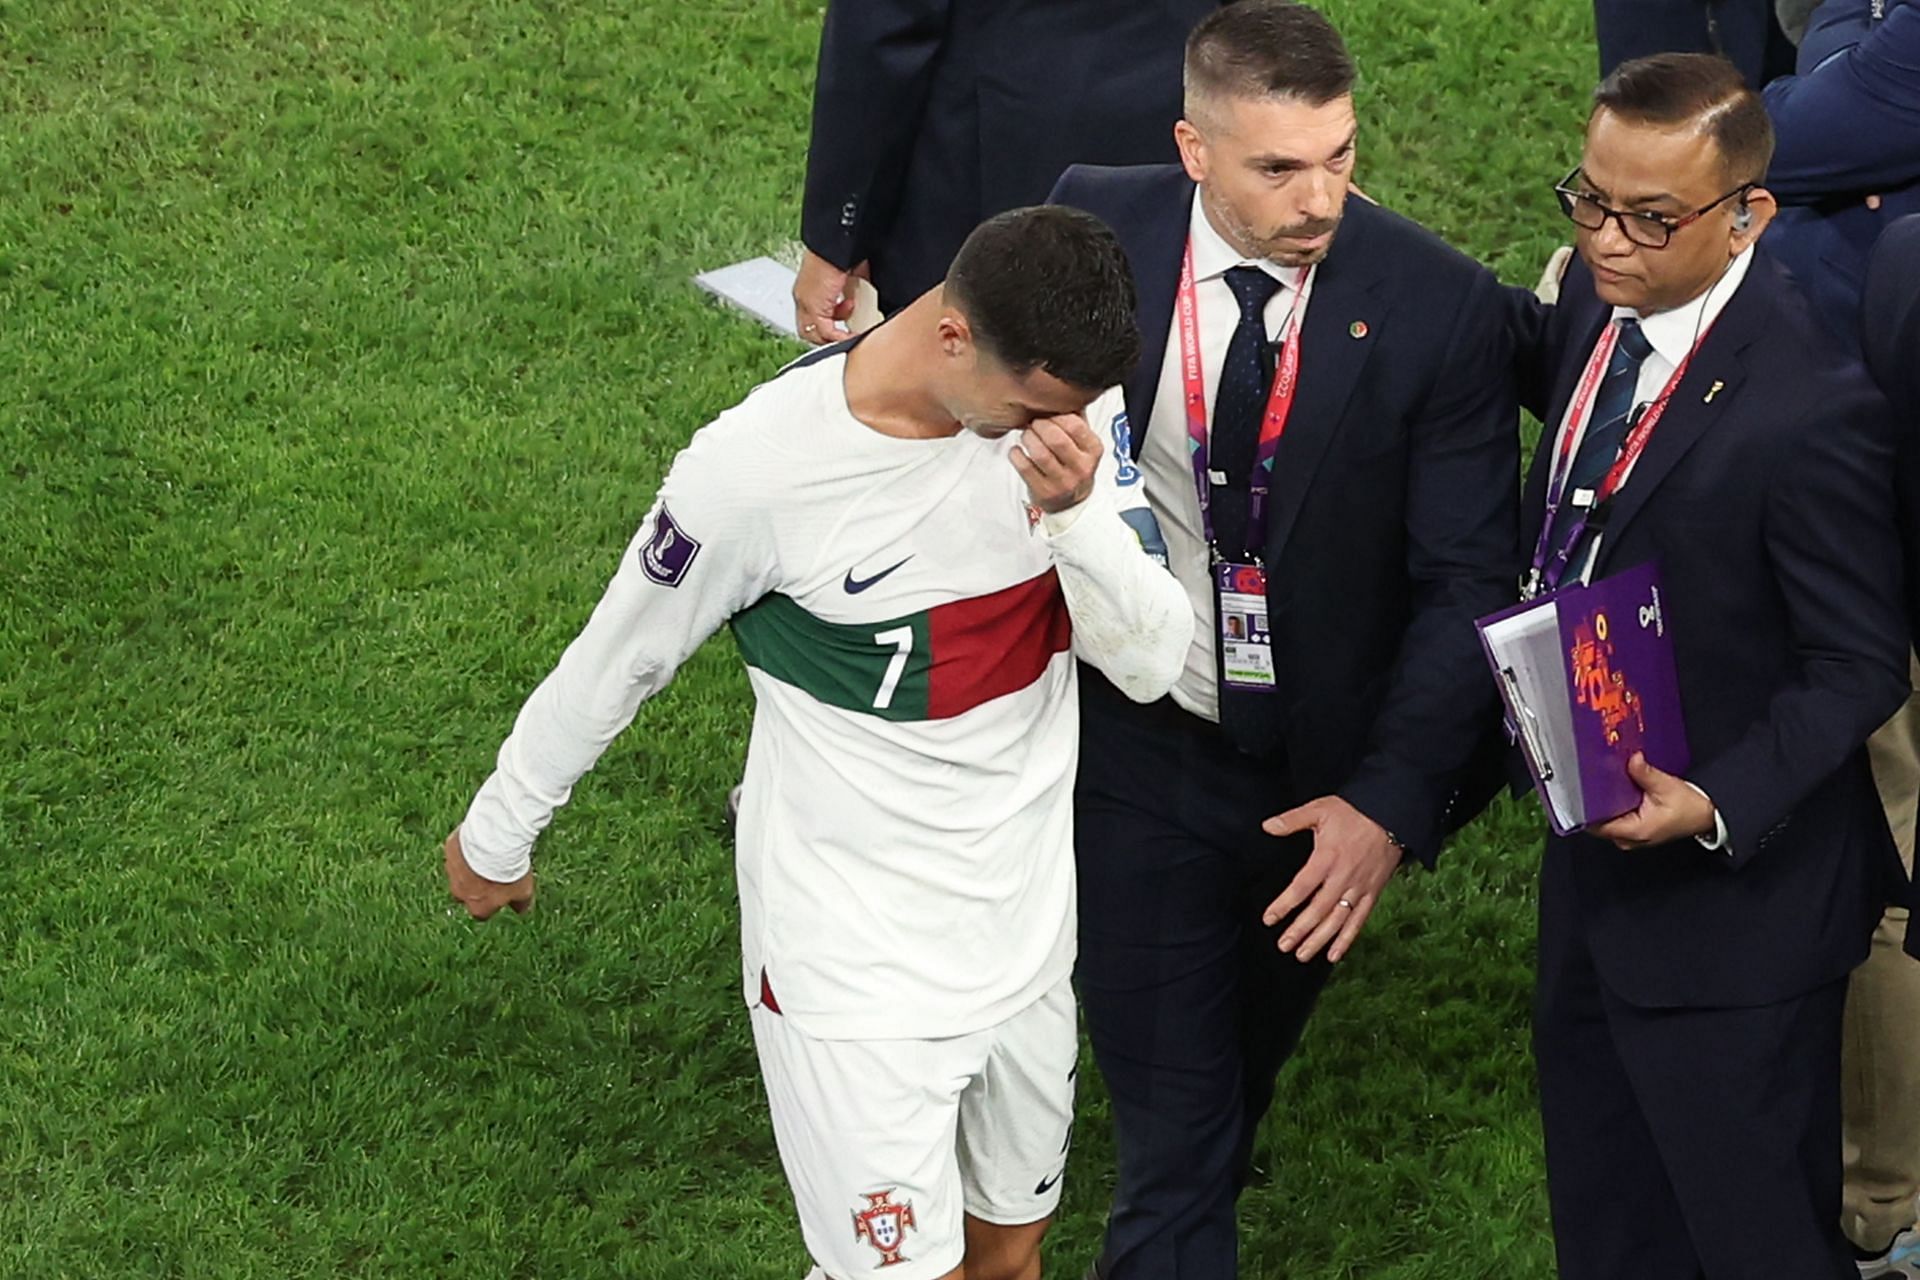 Cristiano Ronaldo made an emotional exit from the World Cup